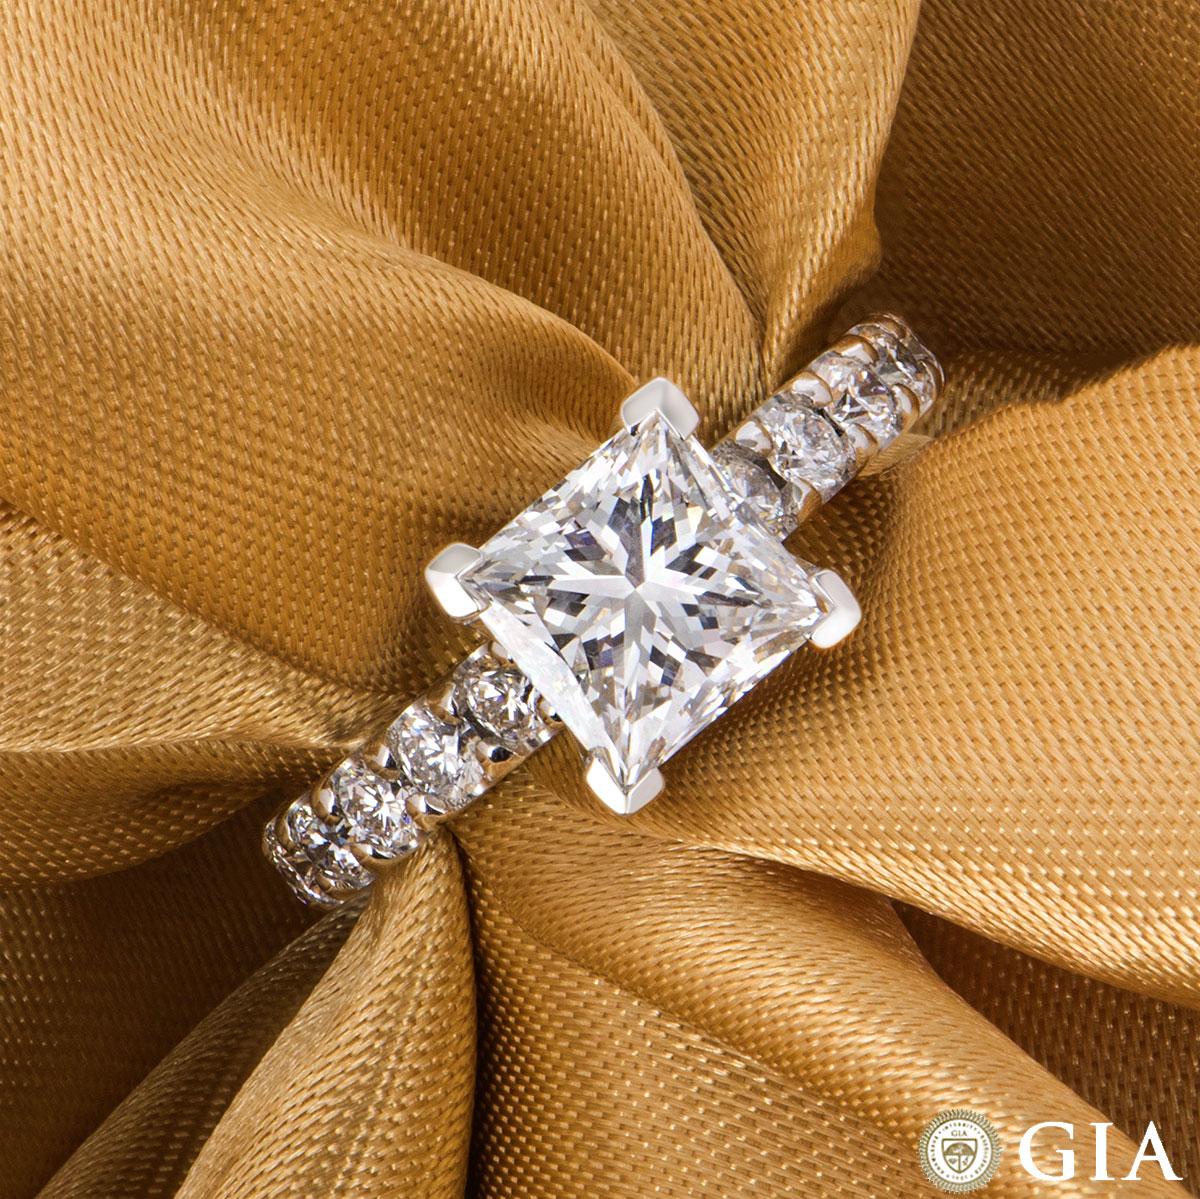 A stunning 18k white gold princess cut diamond ring. The ring features a 2.01ct, F colour and VVS1 clarity princess cut diamond in the centre with a four prong setting and 6 round brilliant cut diamonds on each shoulder with an approximate total